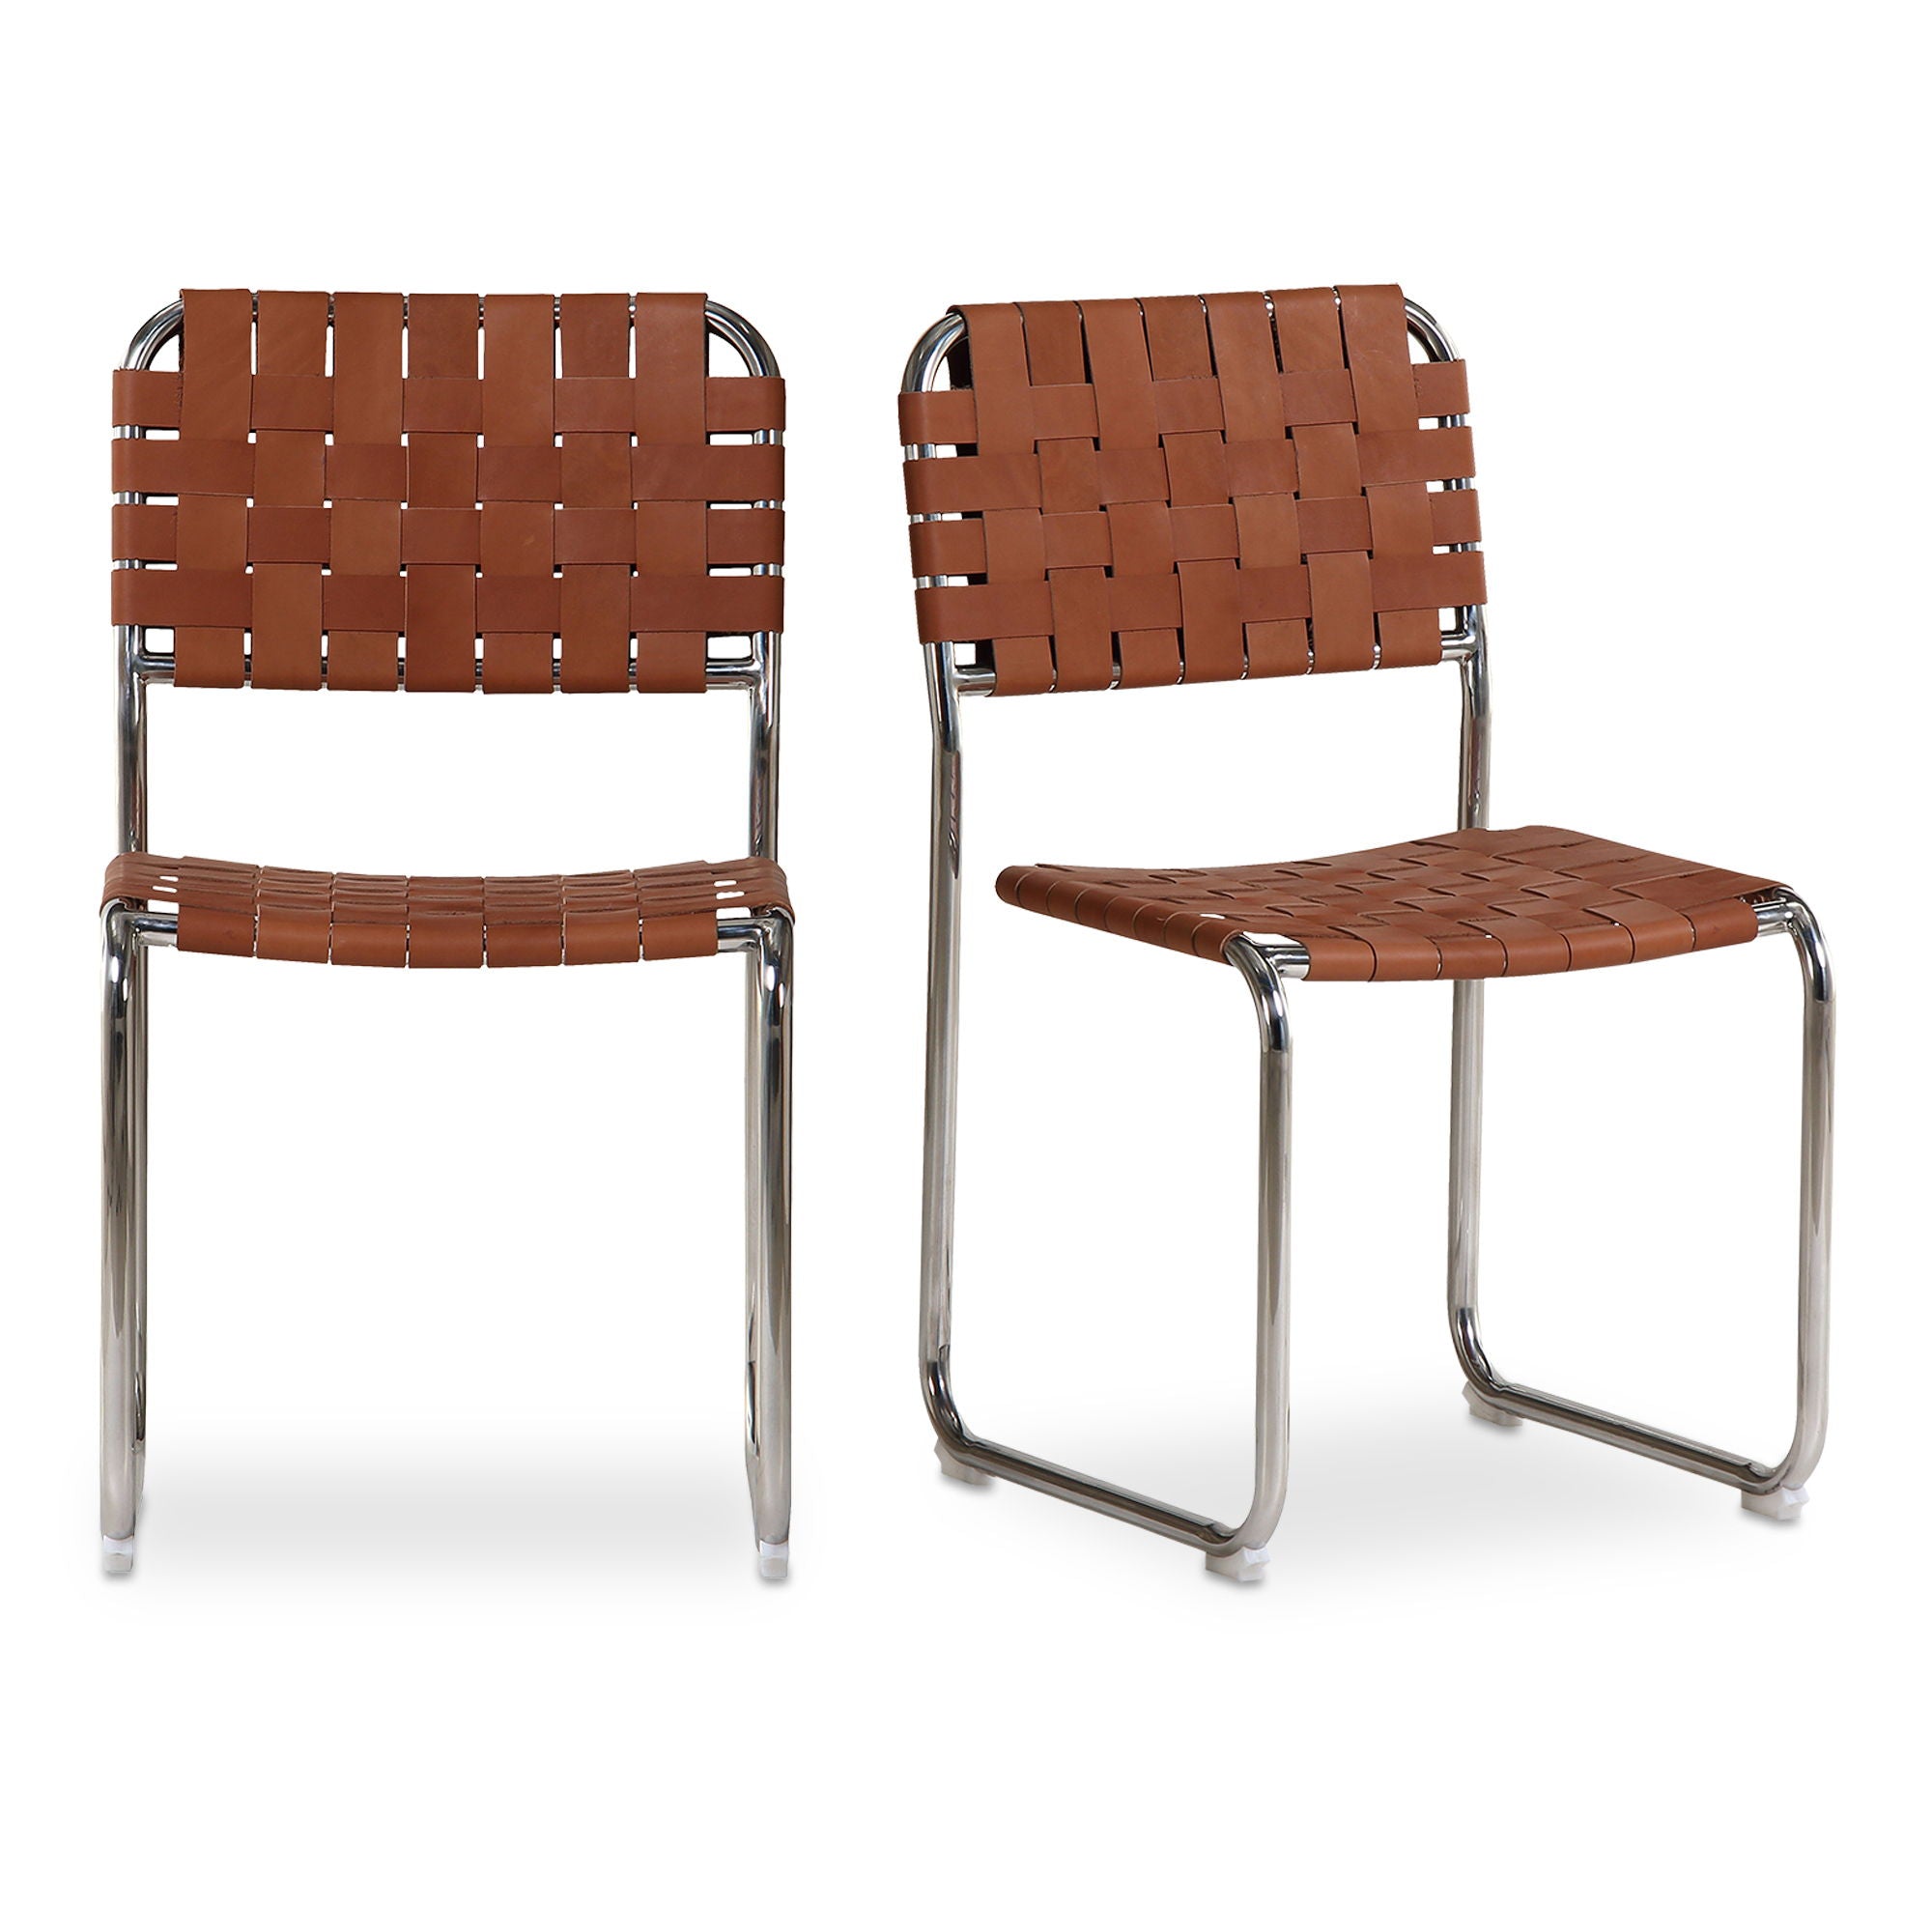 Moma - Stainless Steel Dining Chair (Set of 2) - Dark Brown